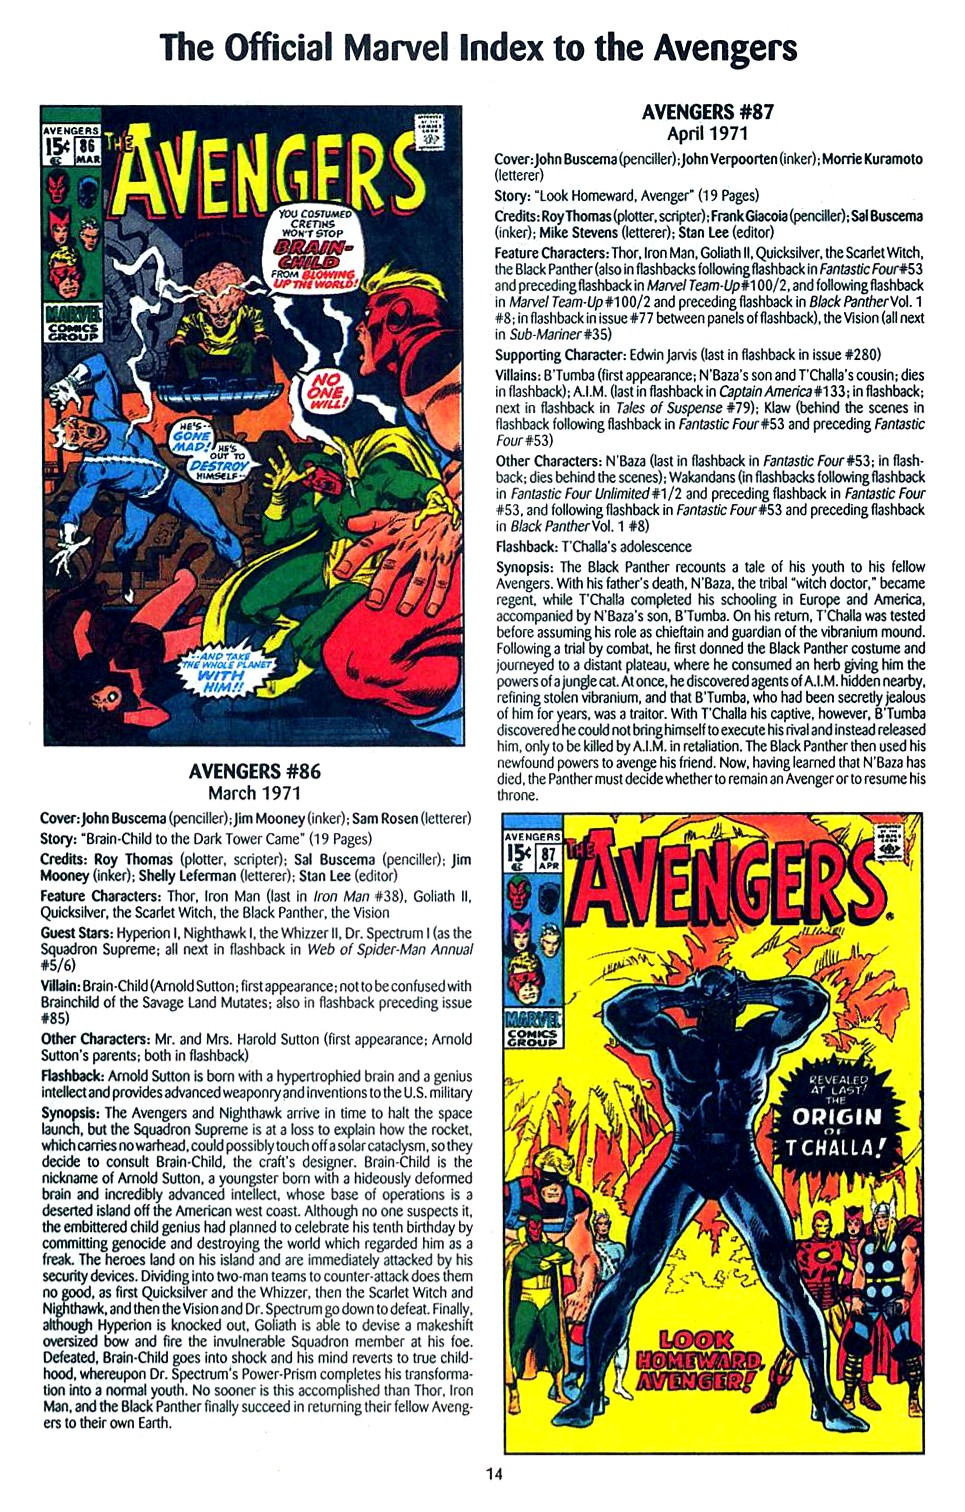 Read online The Official Marvel Index to the Avengers comic -  Issue #2 - 16